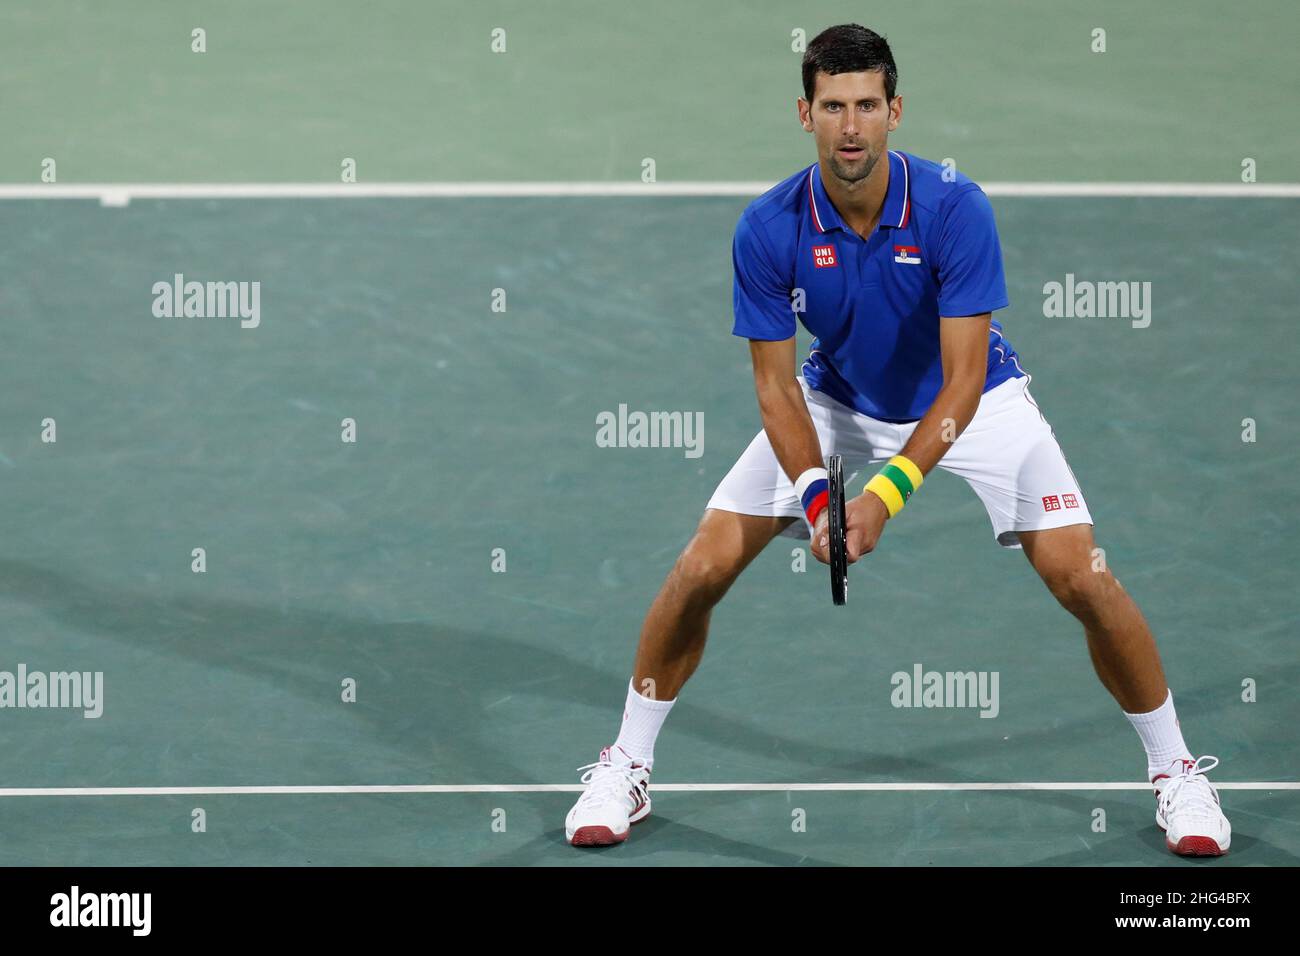 Novak Djokovic tennis player from Serbia competes on court at the Rio